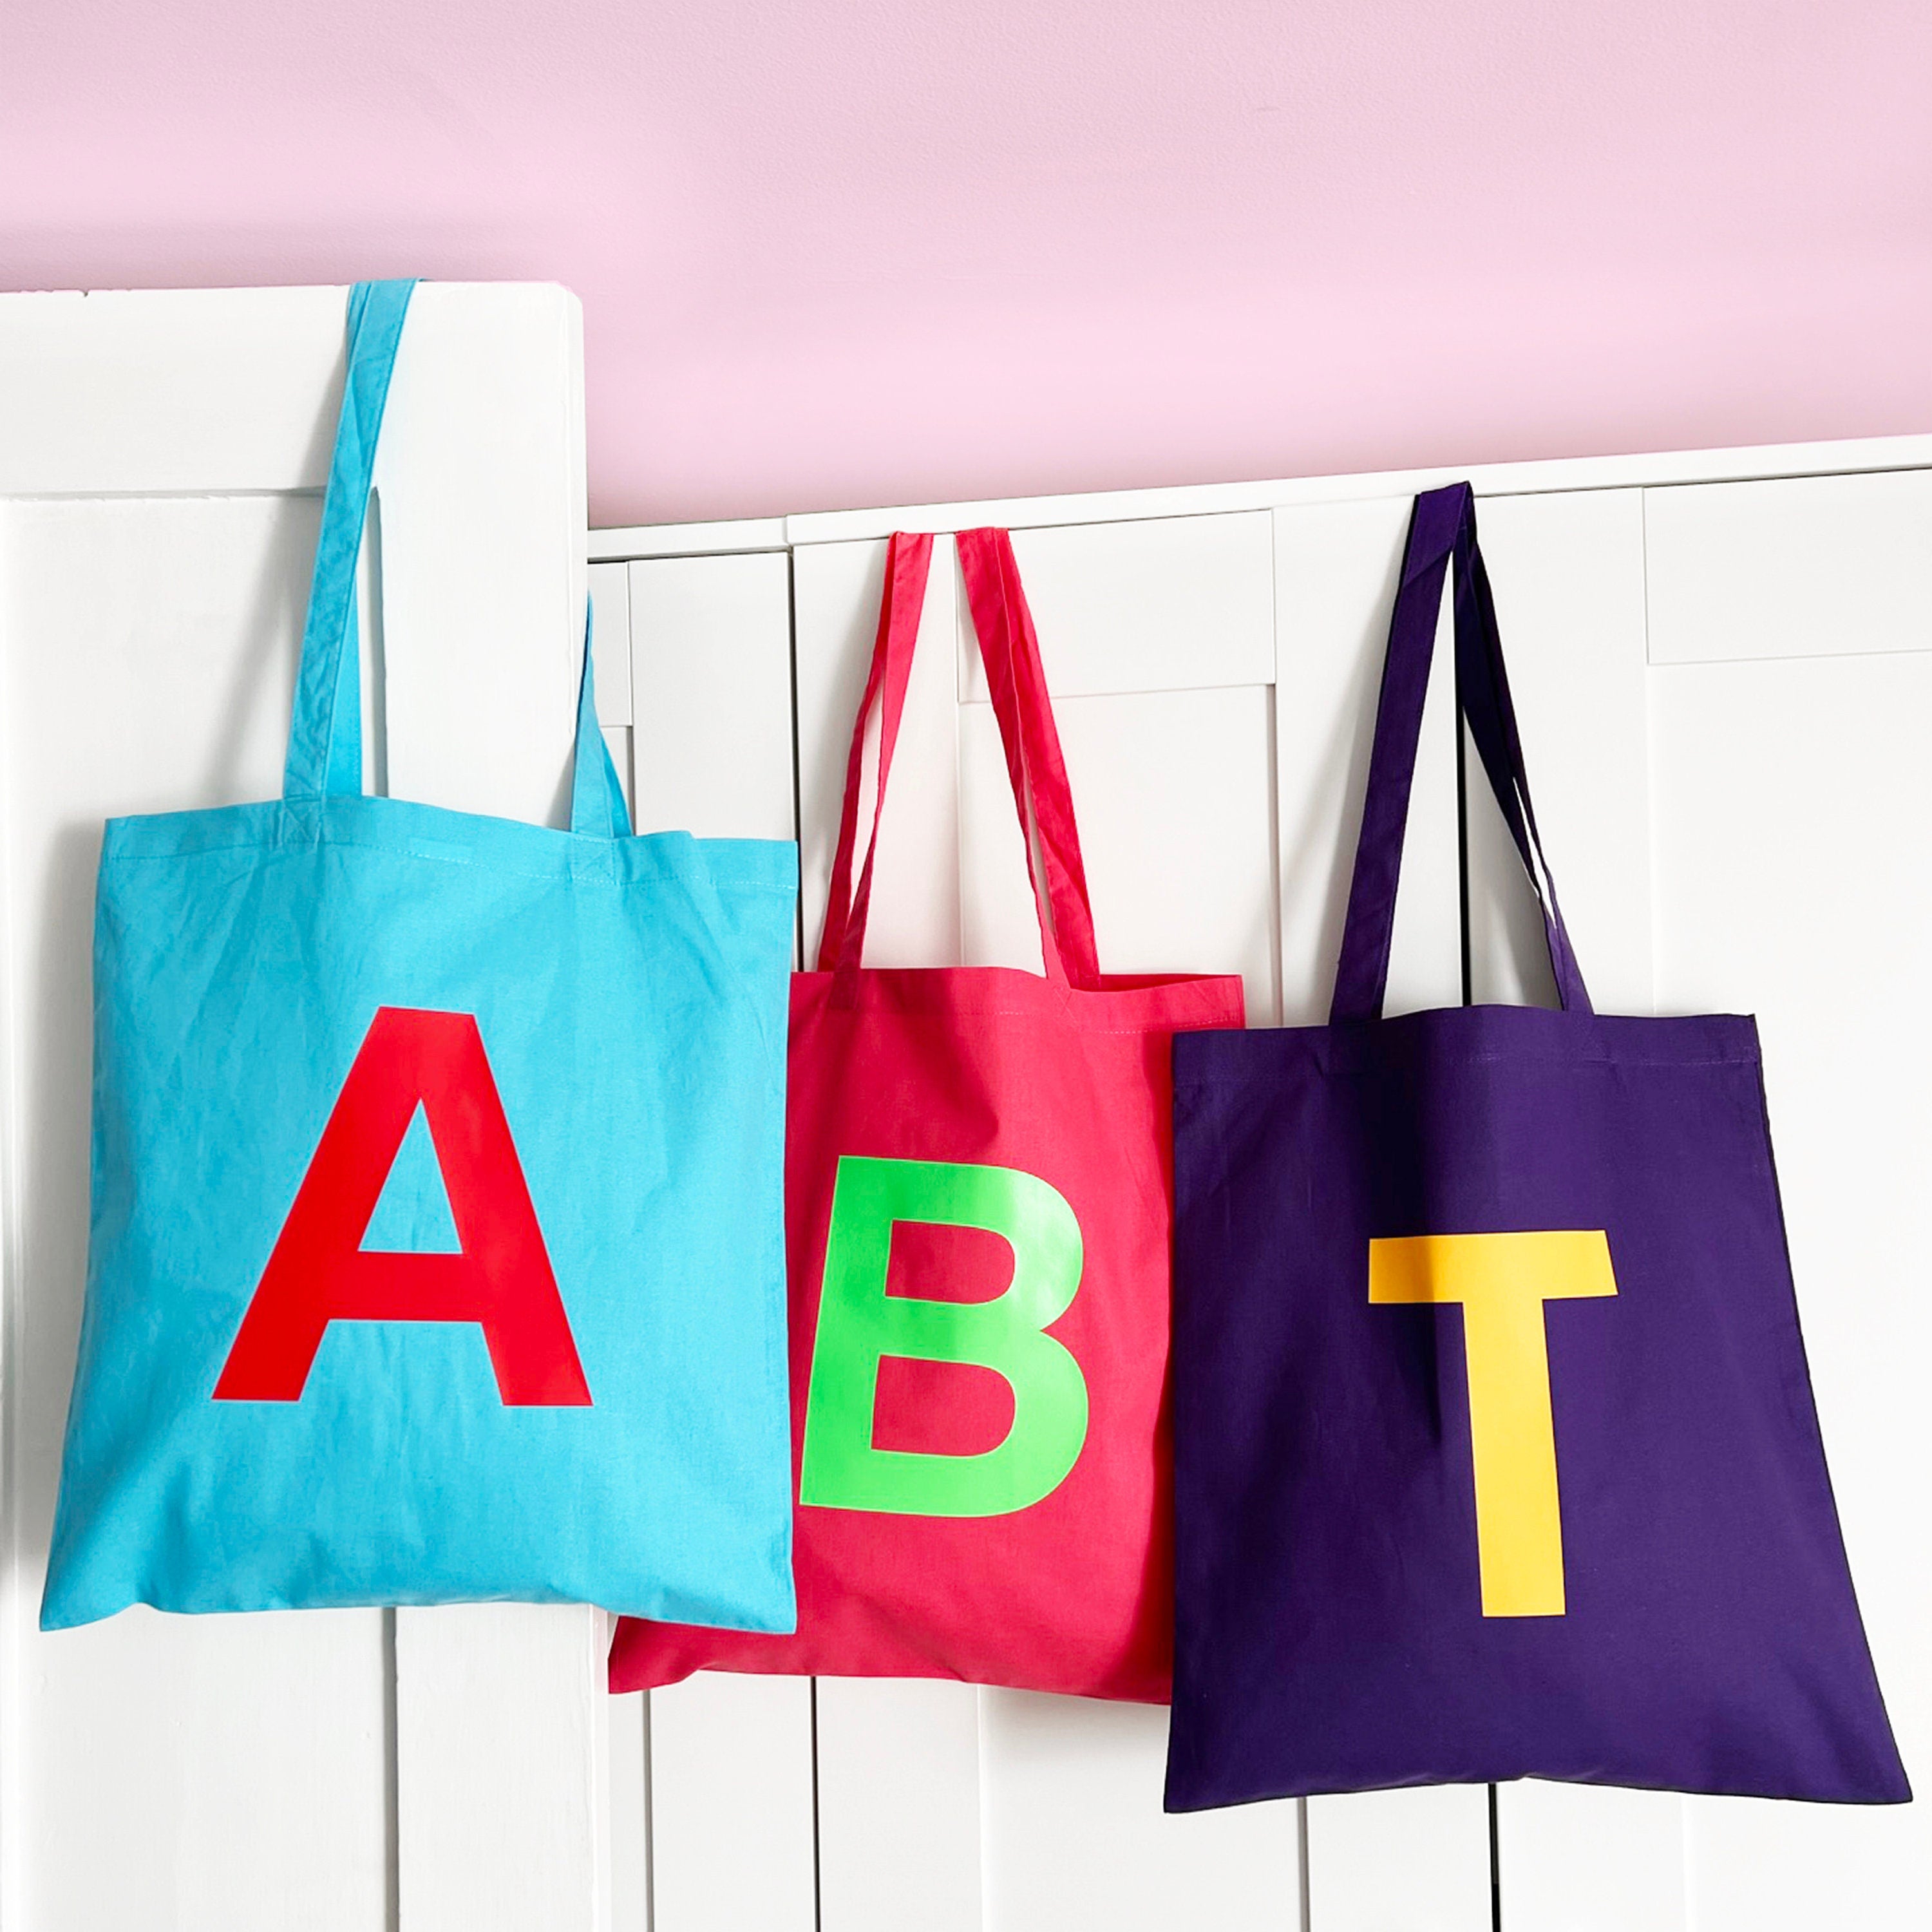 Initial Letter Alphabet Tote Bag Personalised - Bright Rainbow colours - Shopping Bag - Gift - Stylish Tote - Vibrant Colour Print options